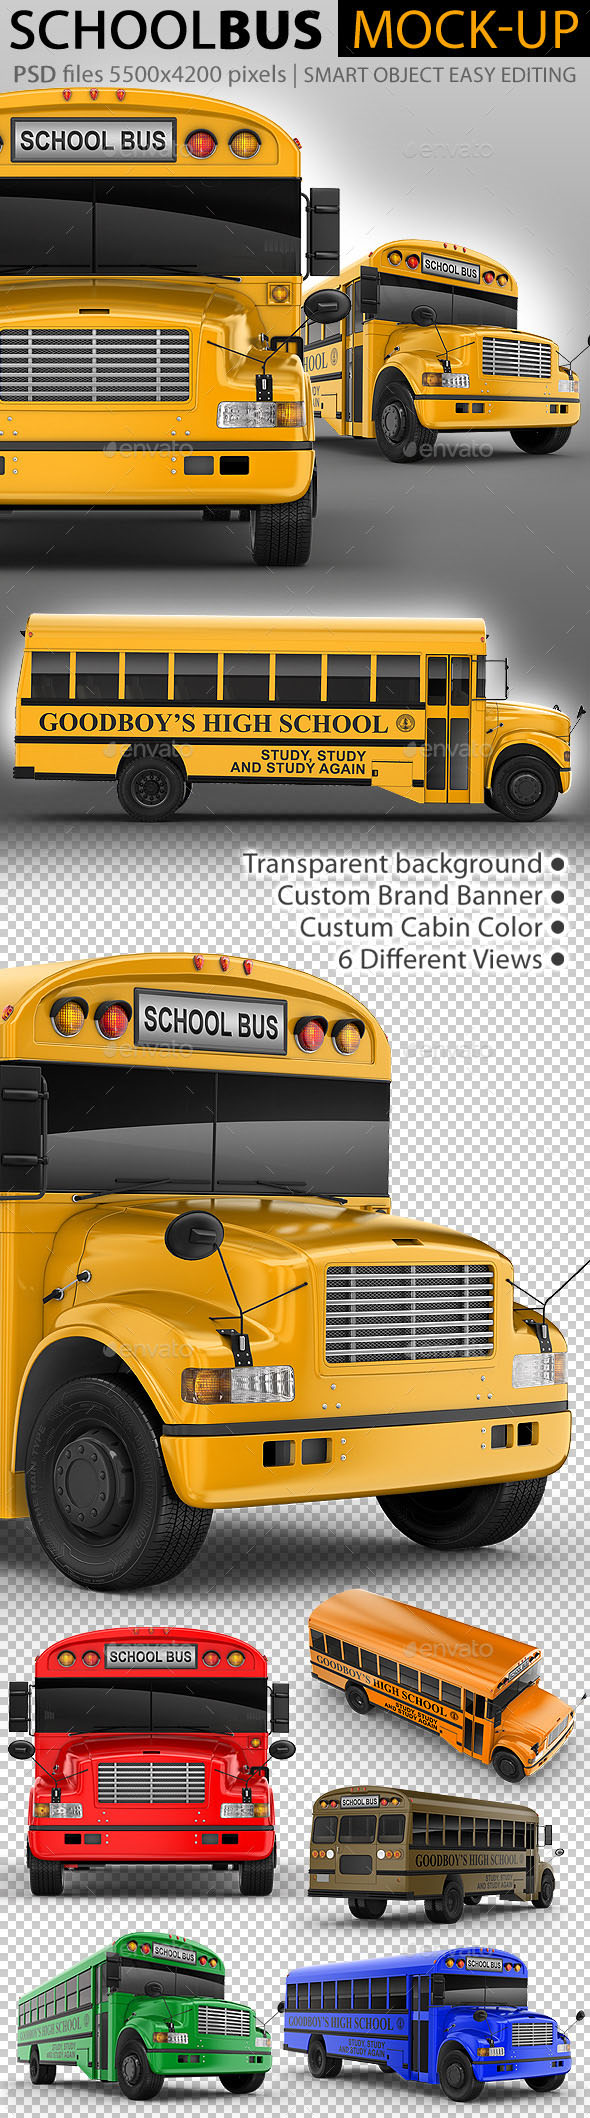 Easy Editing 3D Mockup for School Bus